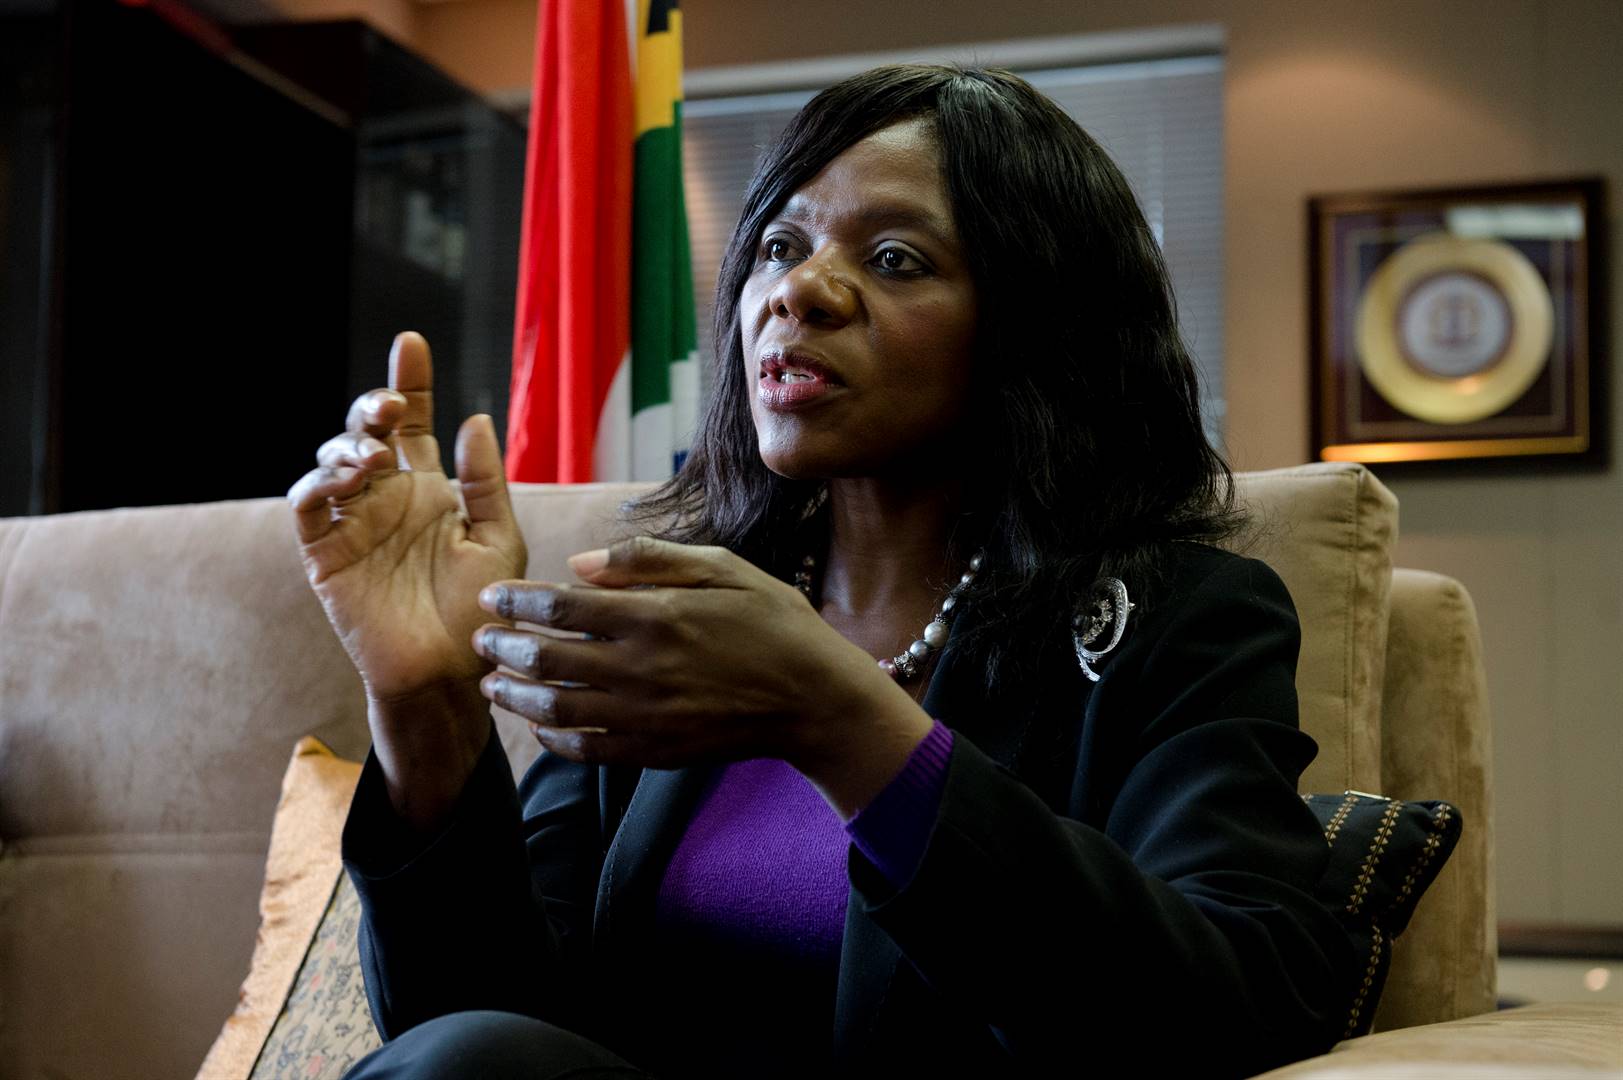 Former Public Protector Thuli Madonsela says there are still many people who were part of the state capture administration in the current system as the wheels of justice turn too slowly.